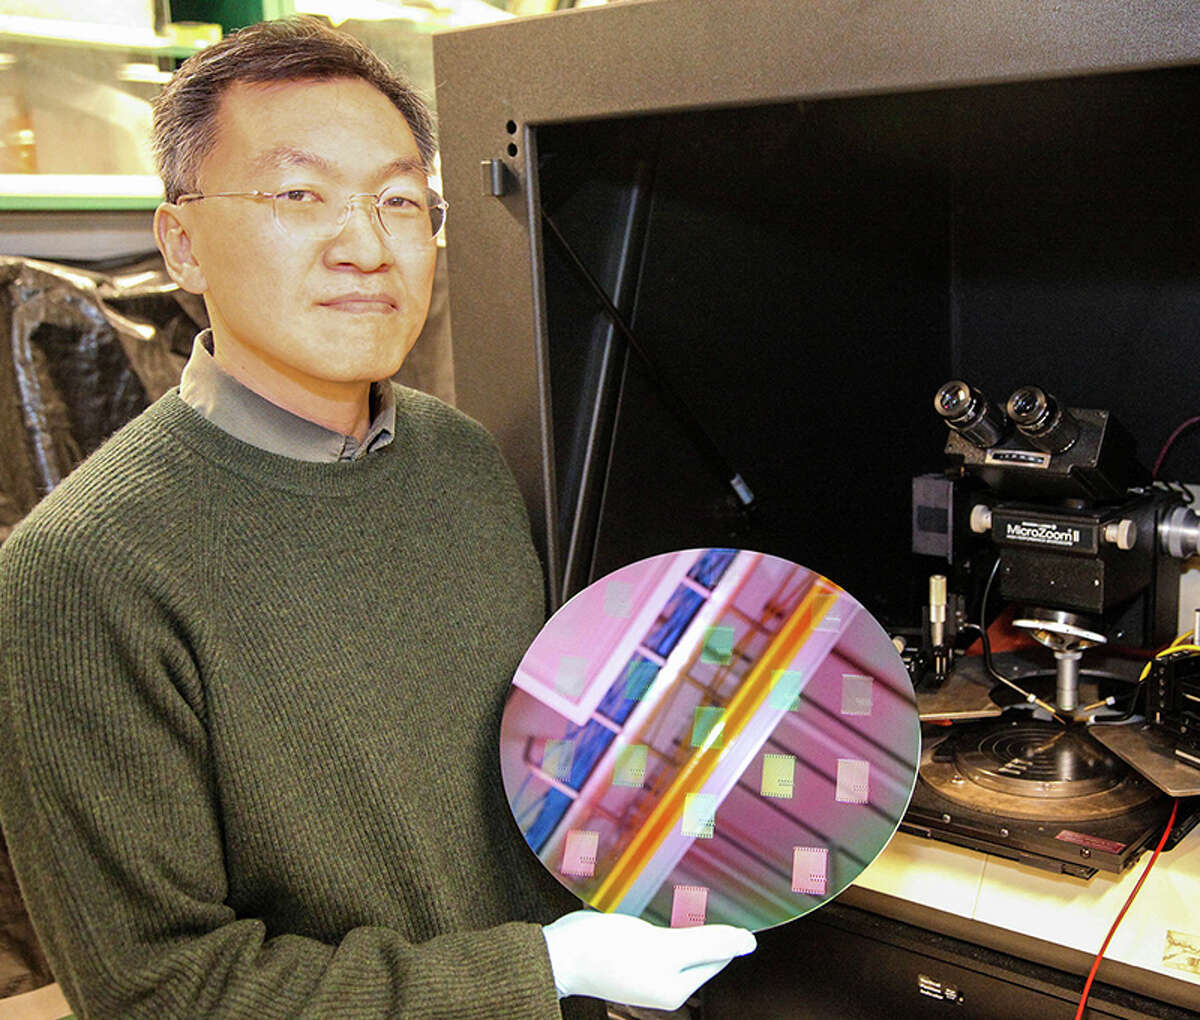 Ji Ung Lee, a SUNY Polytechnic Institute professor, recently won a $6.25 million grant from the Naval Research Laboratory for research into artificial intelligence hardware. Such expertise and research dollars have encouraged companies like IBM to spend more on research in Albany.